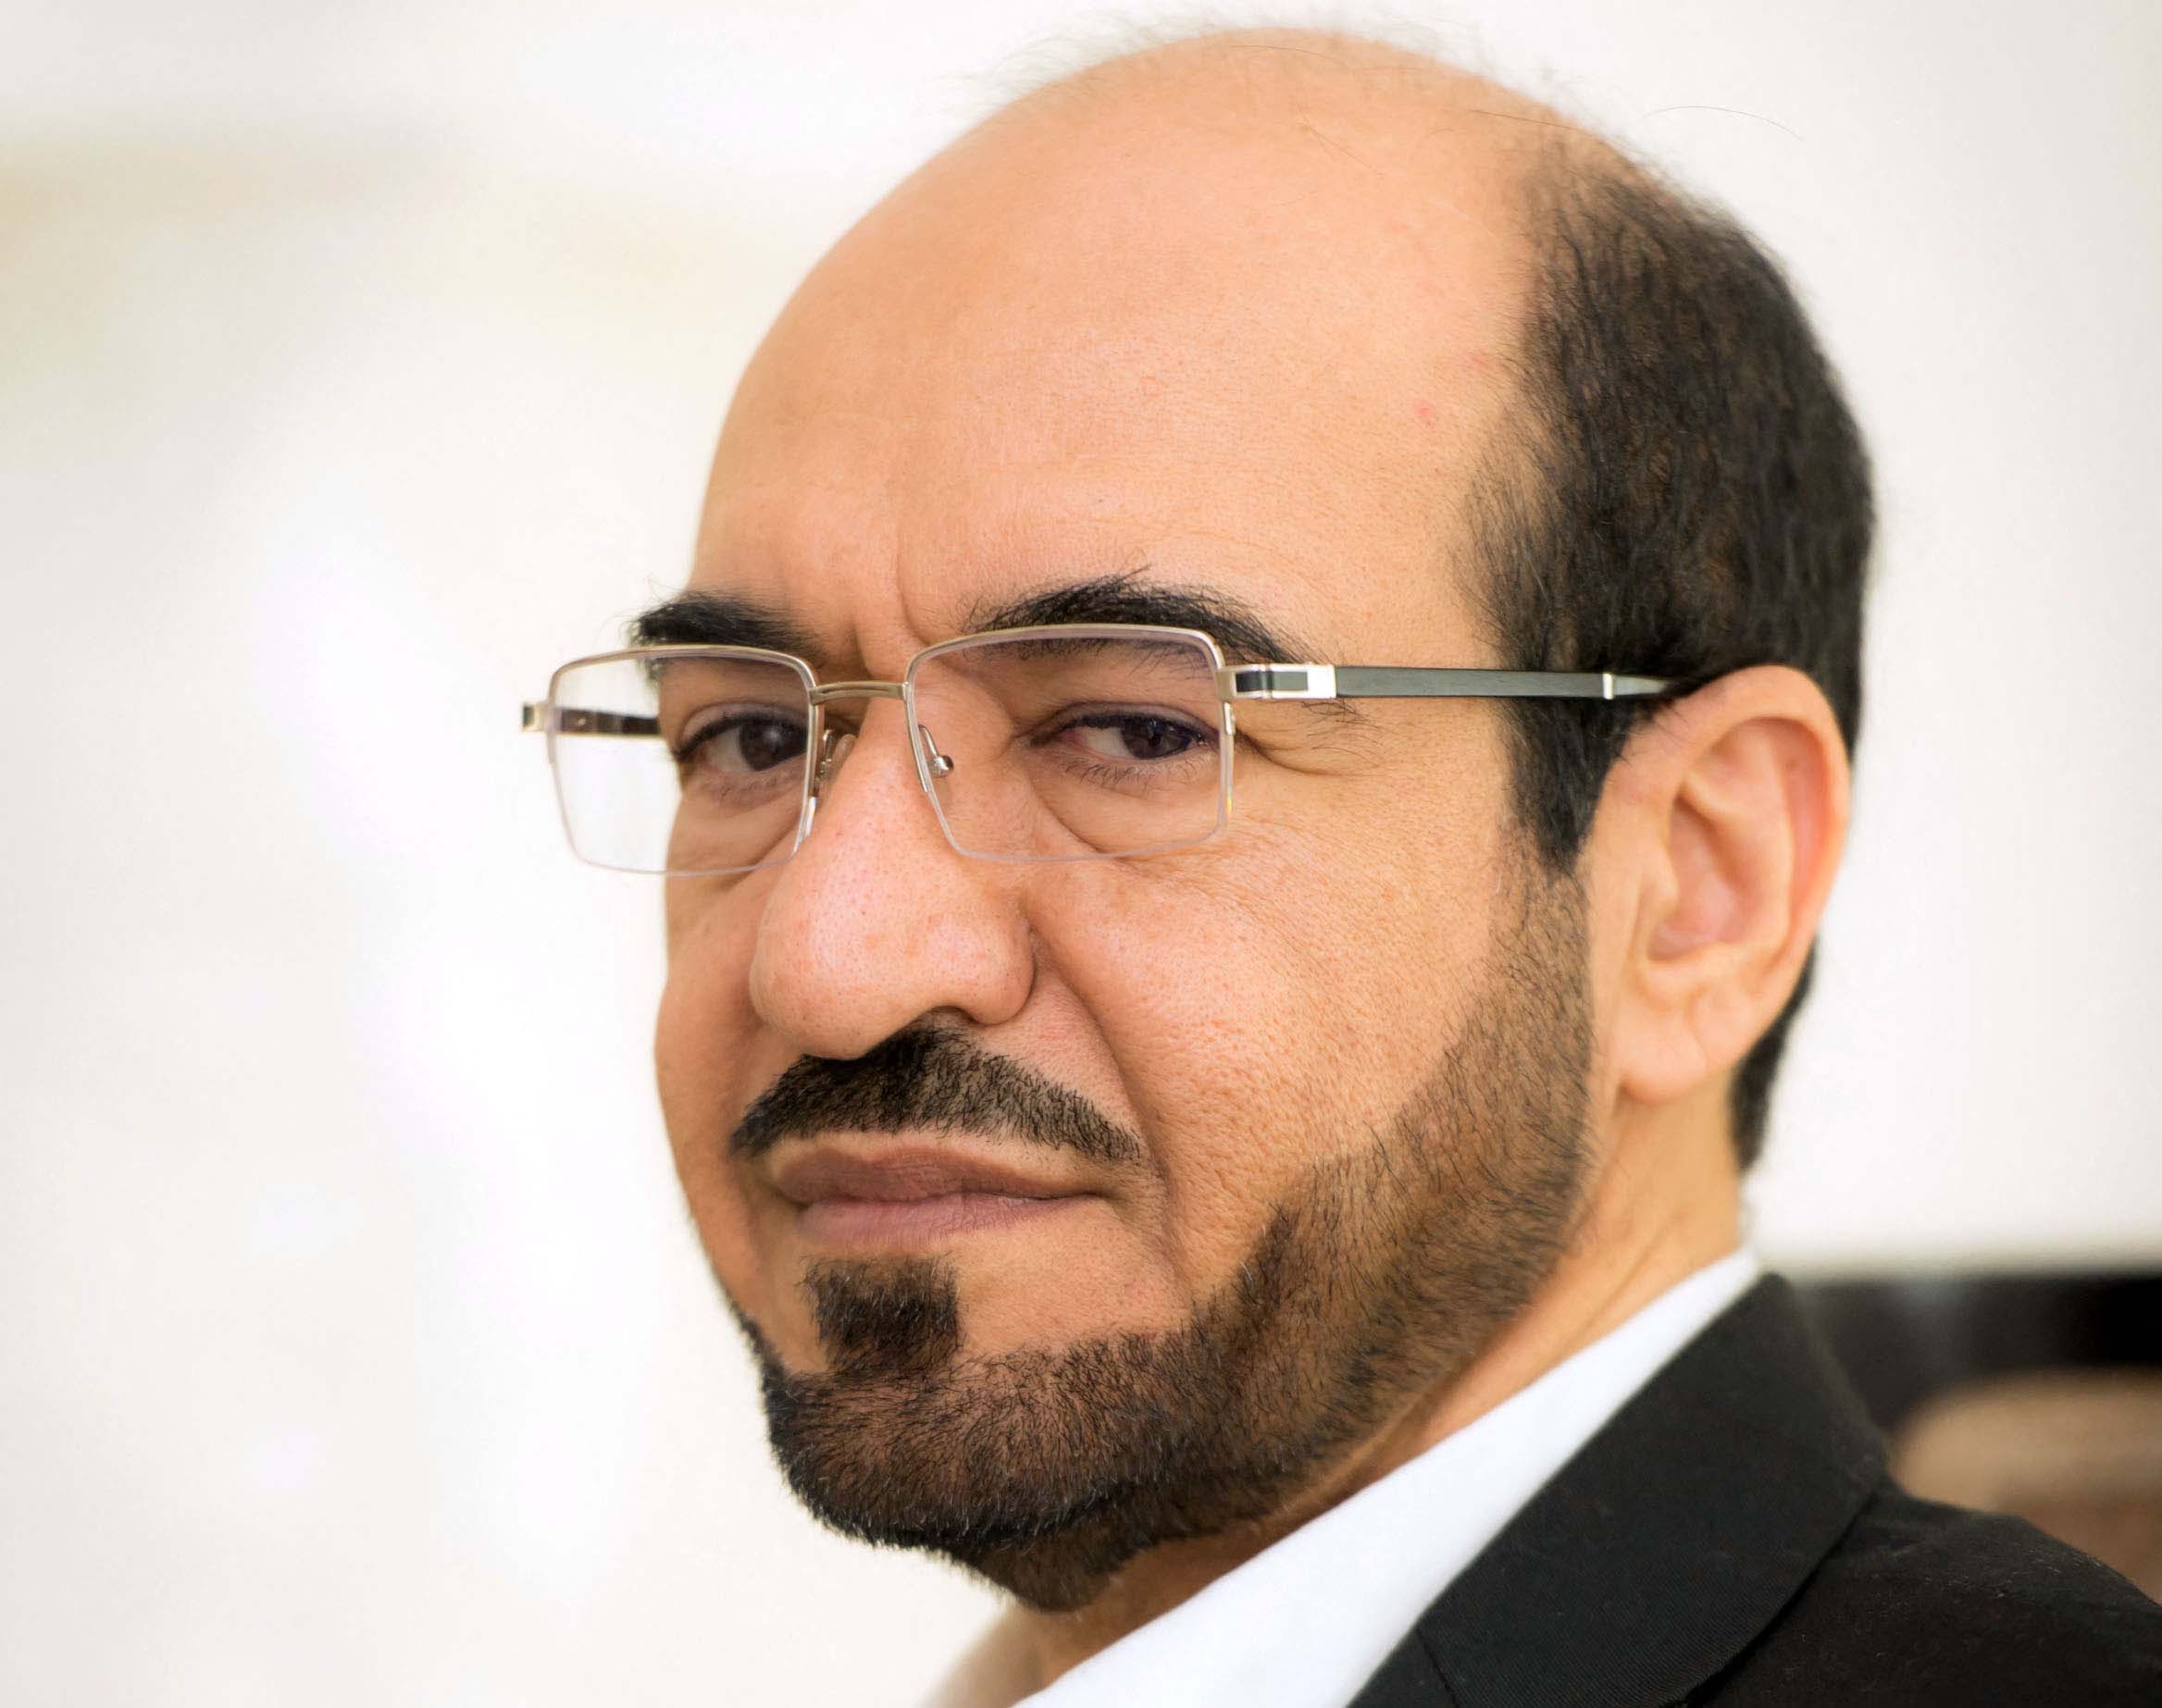 Jabri is a former top Saudi counterterrorism official, and has had close ties with the Central Intelligence Agency in the US.